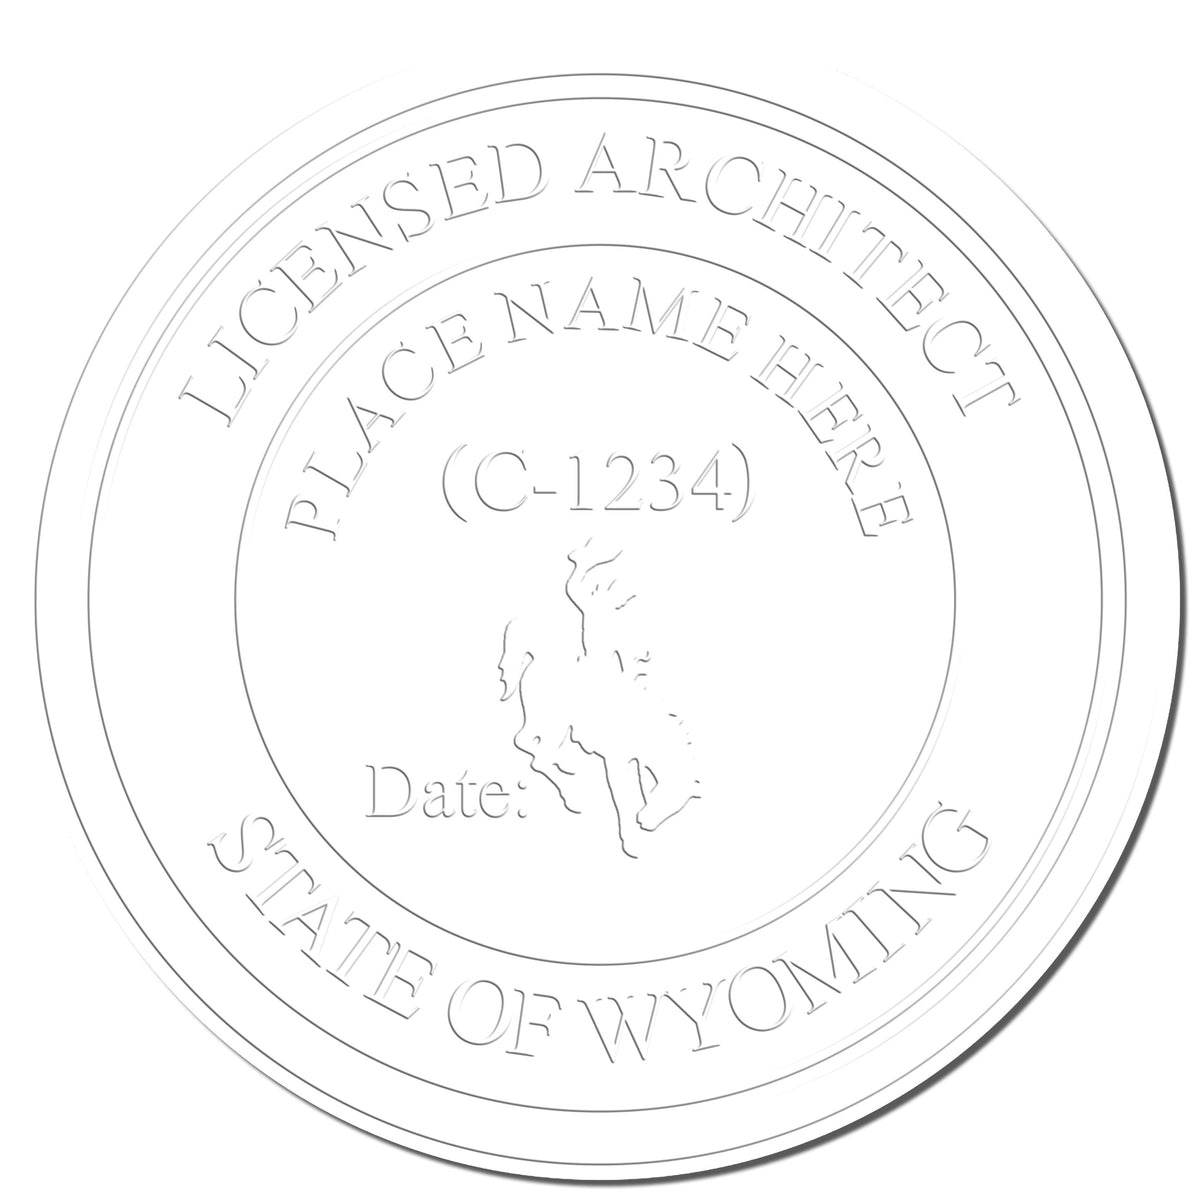 This paper is stamped with a sample imprint of the Gift Wyoming Architect Seal, signifying its quality and reliability.